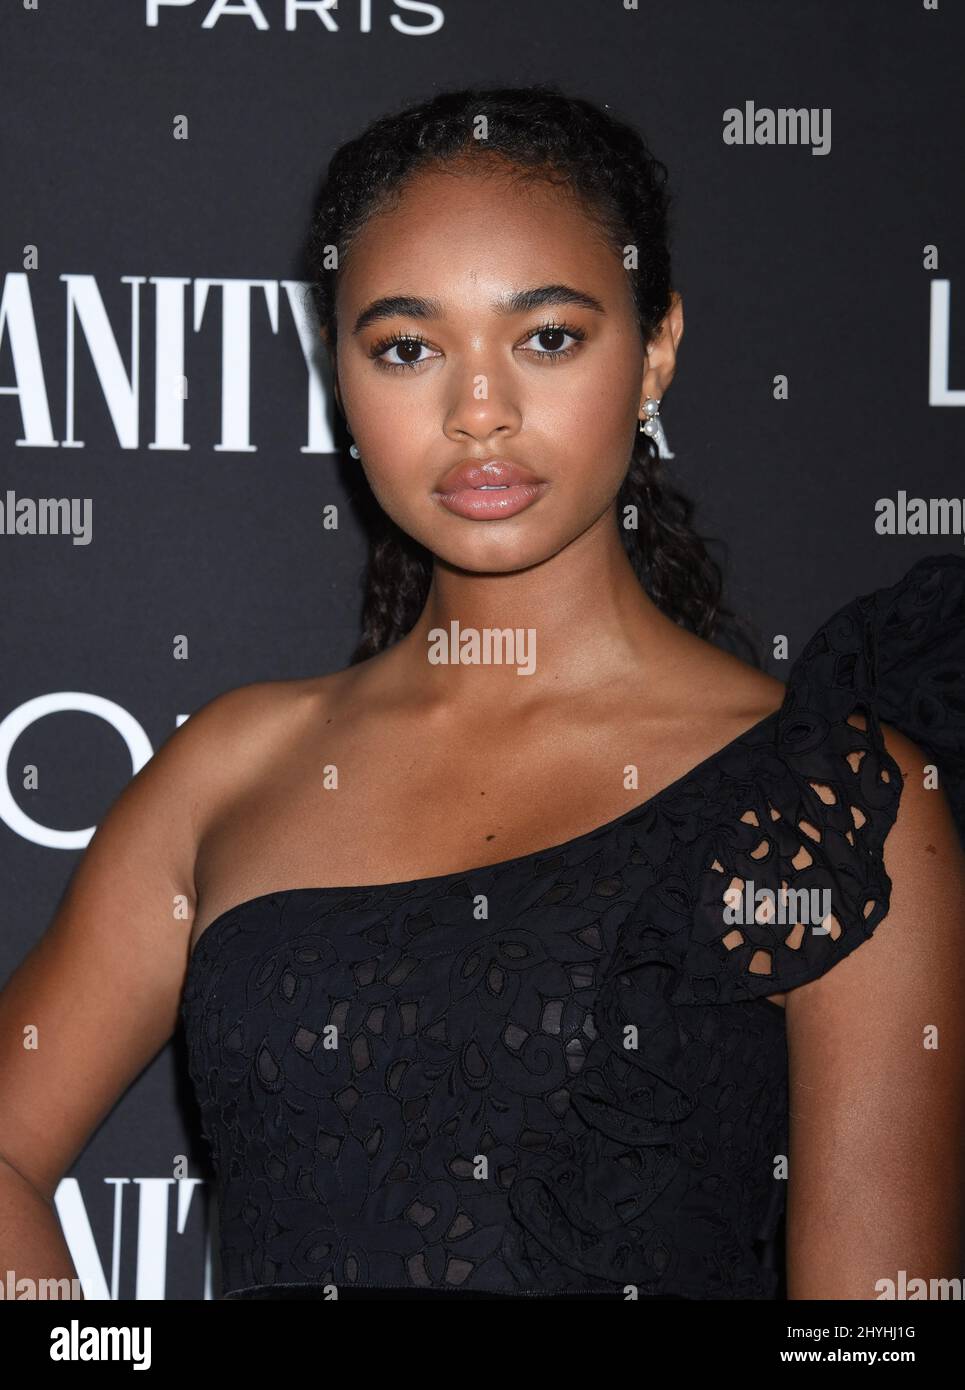 Chandler Kinney at the Vanity Fair and L'Oreal Paris Celebrate New Hollywood Party held at Ysabel on February 19, 2019 in West Hollywood Stock Photo